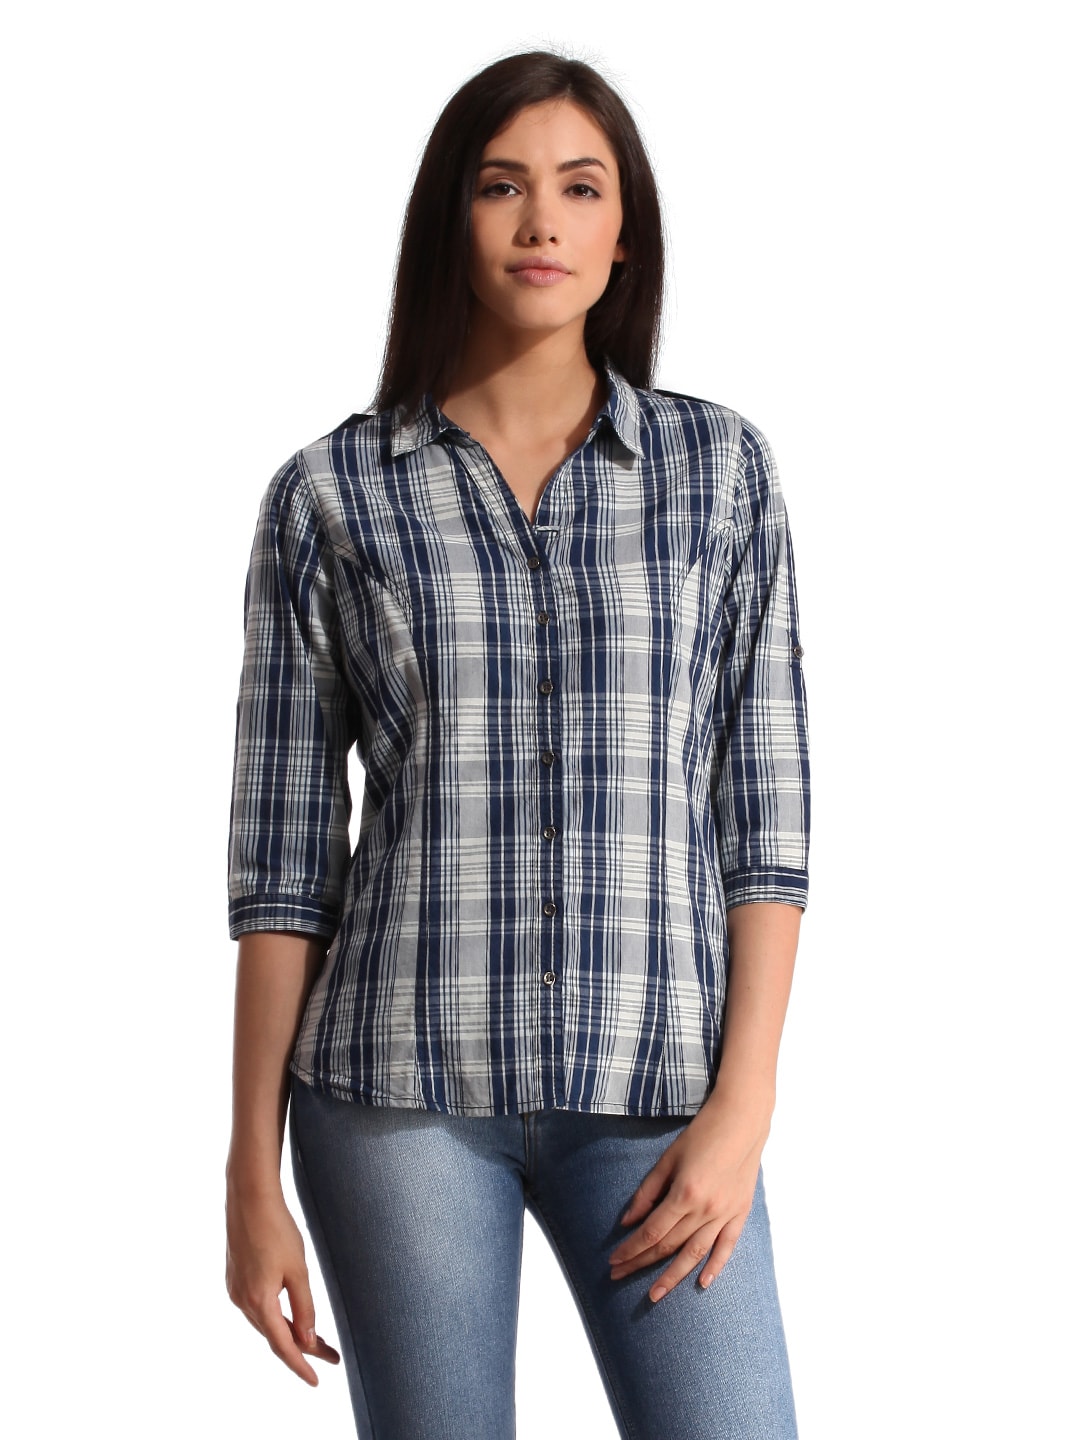 Scullers For Her Women Check Blue Shirt